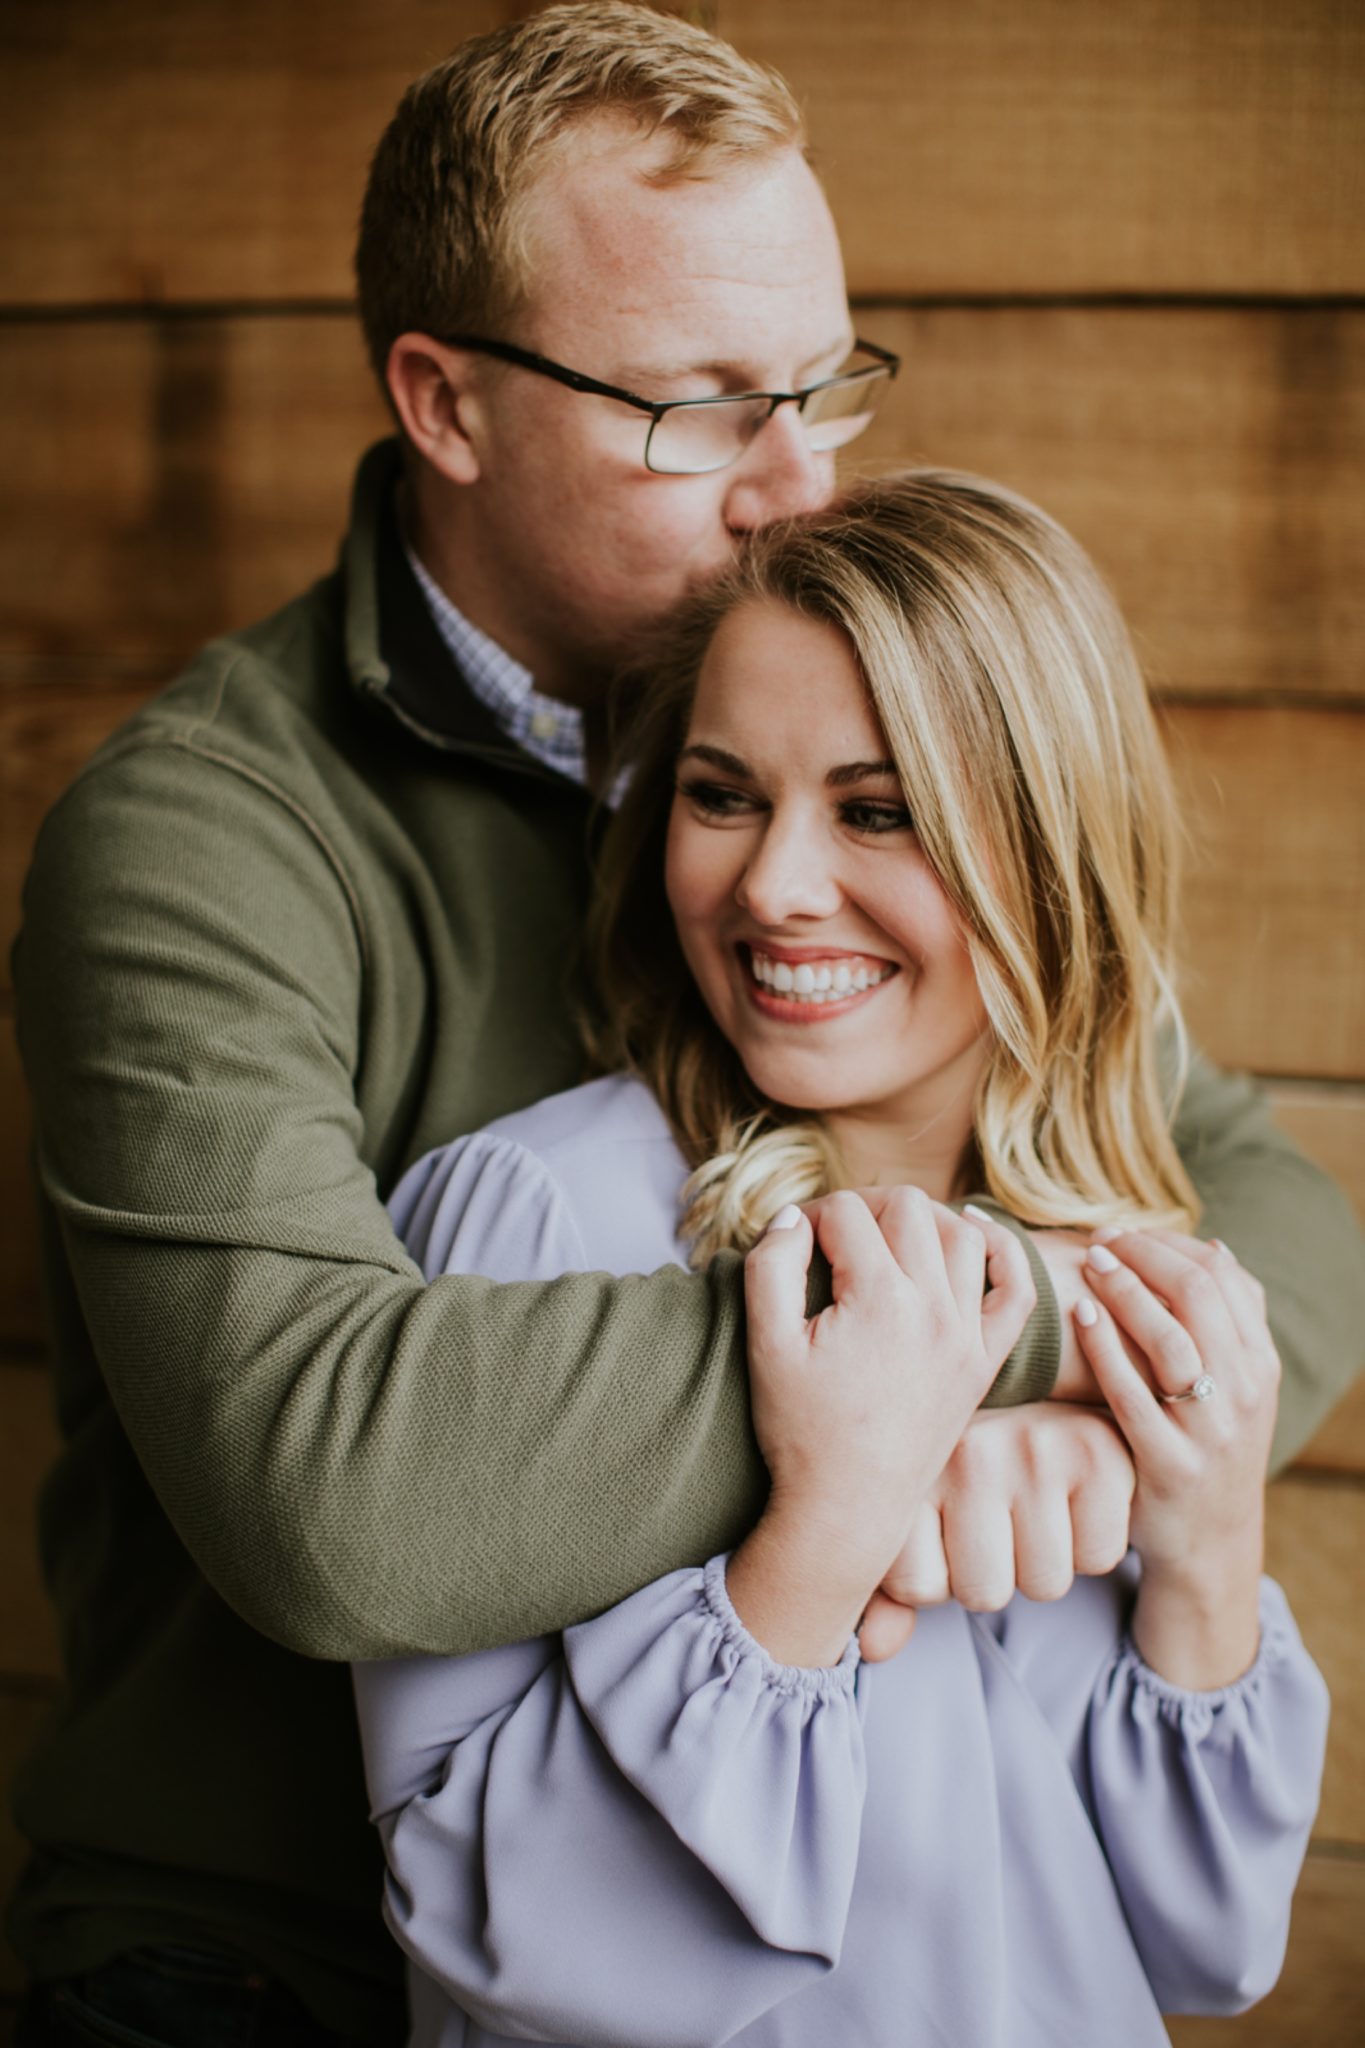 Engagement Photo Session Blonde Couple Wood Wall Athenaeum Theater Indy